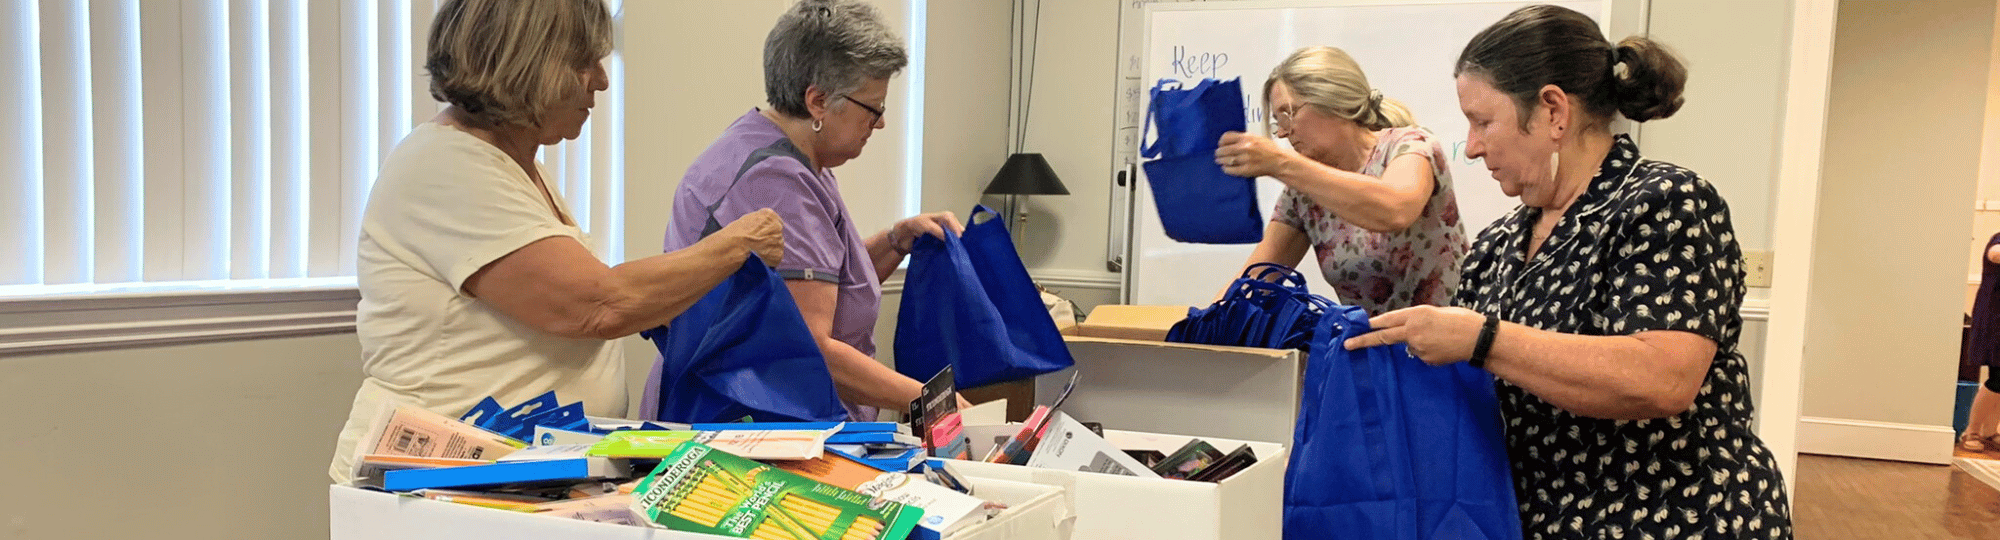 Four women stuffing school supplies into blue bags